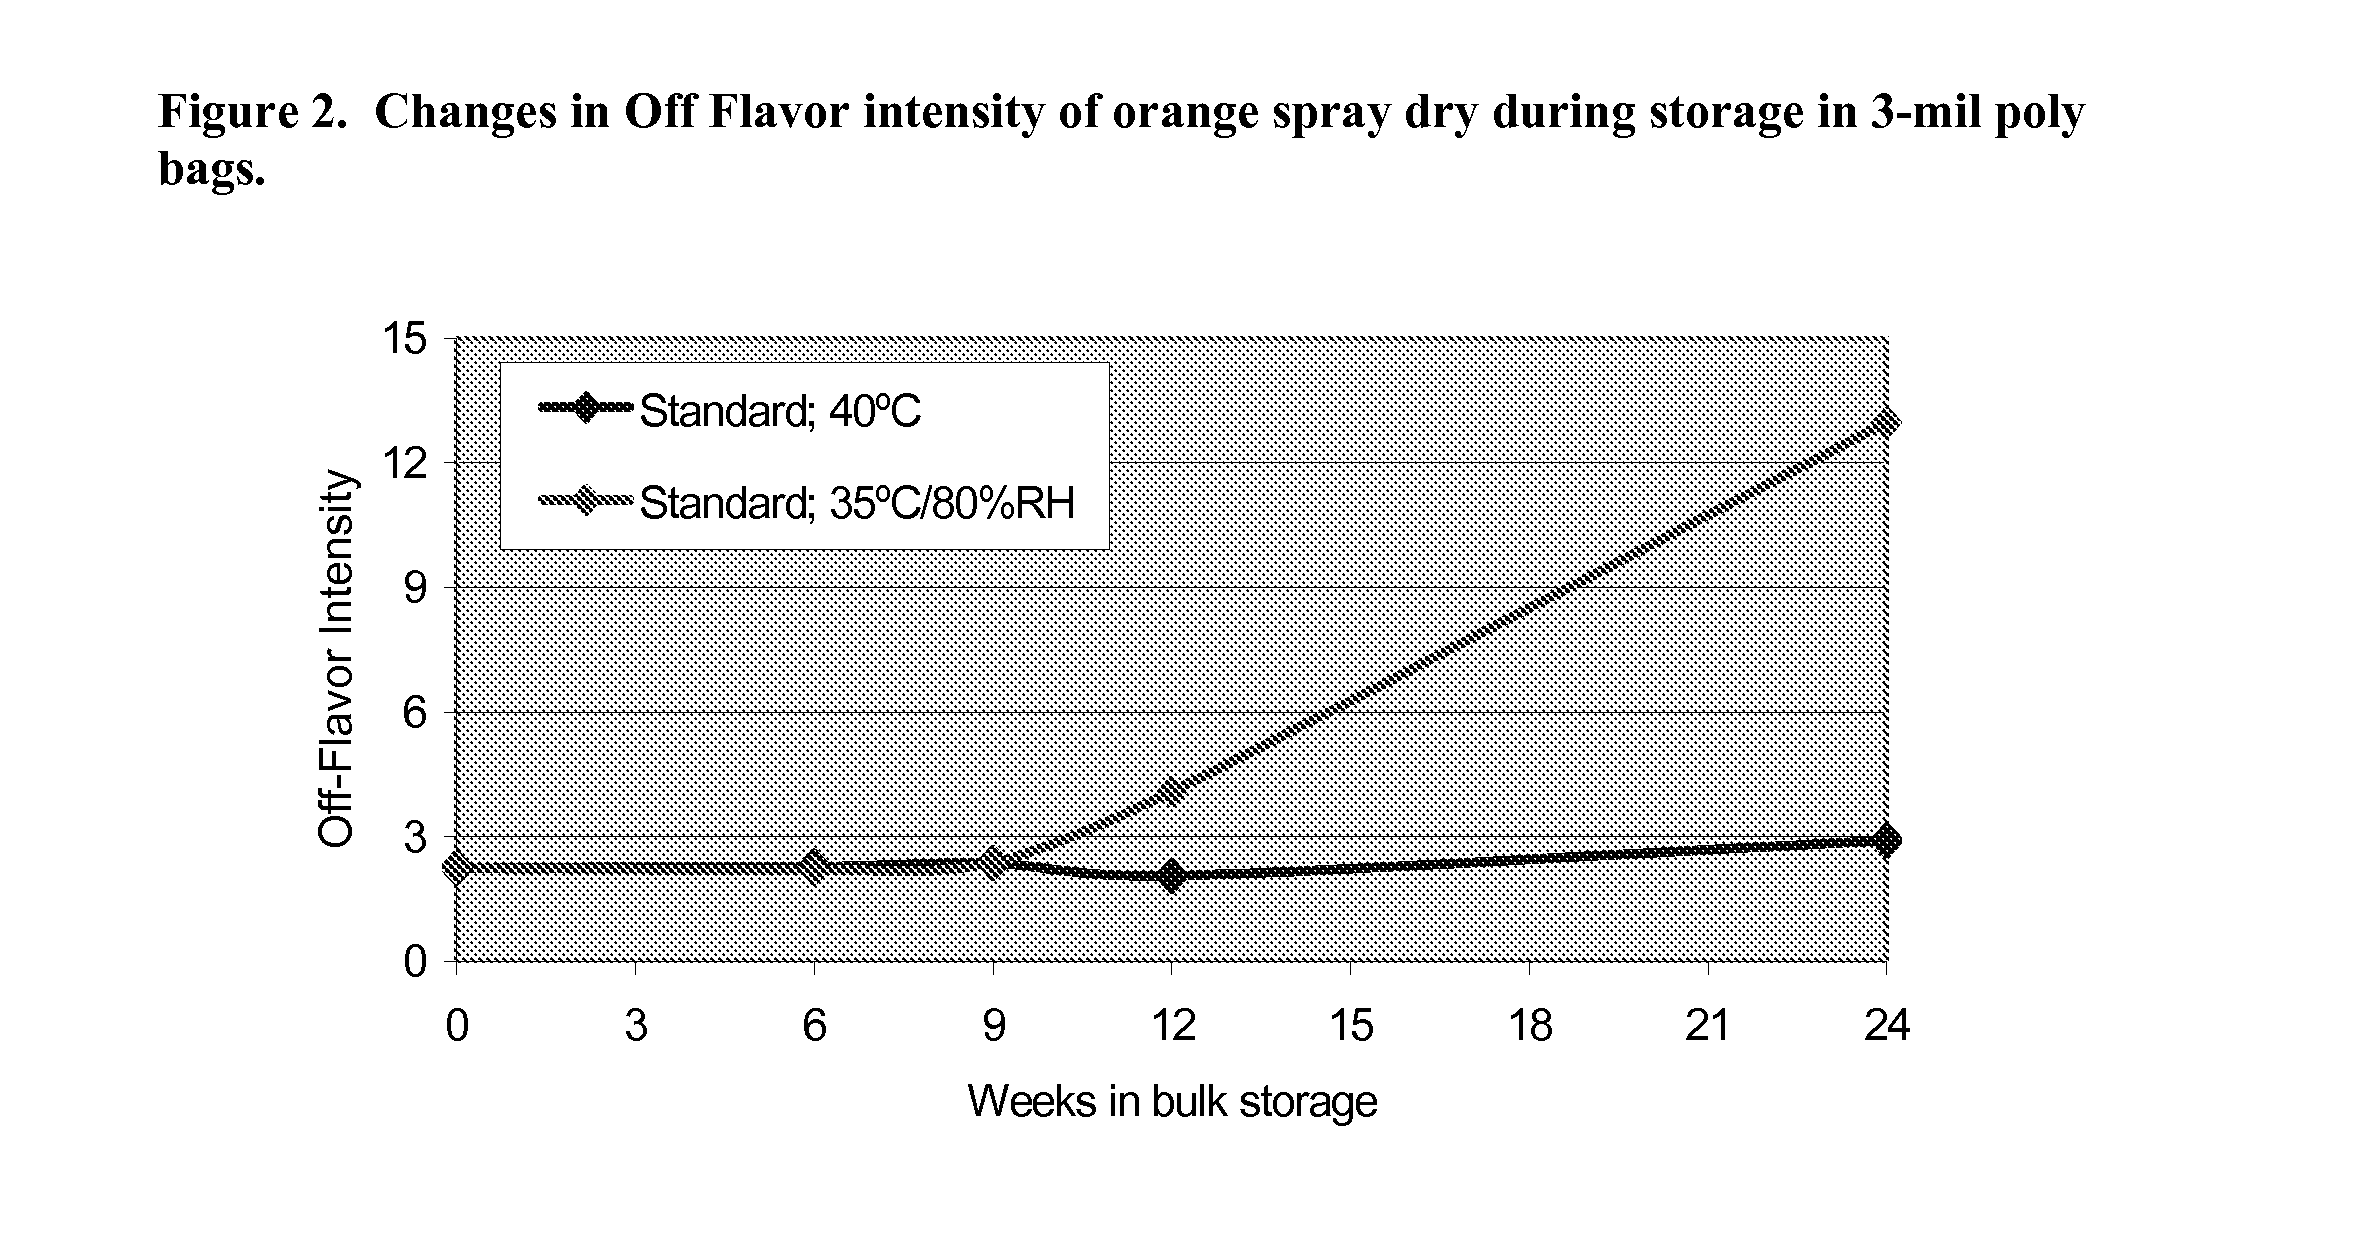 Method of Producing a Shelf-Stable Citrus Spray-Dry Product